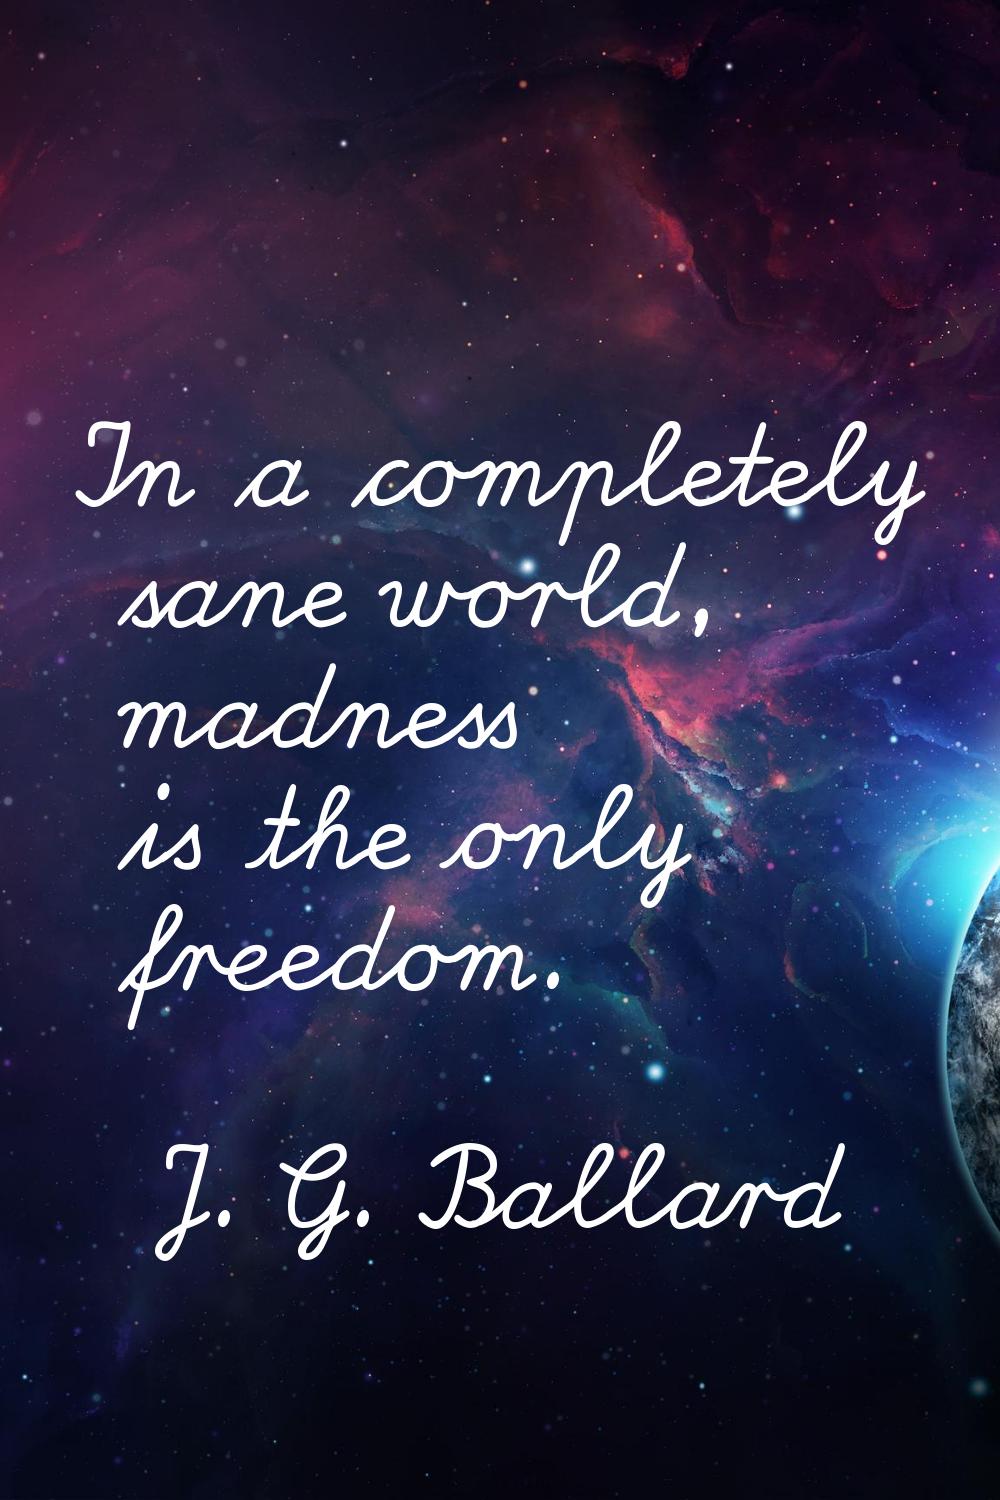 In a completely sane world, madness is the only freedom.